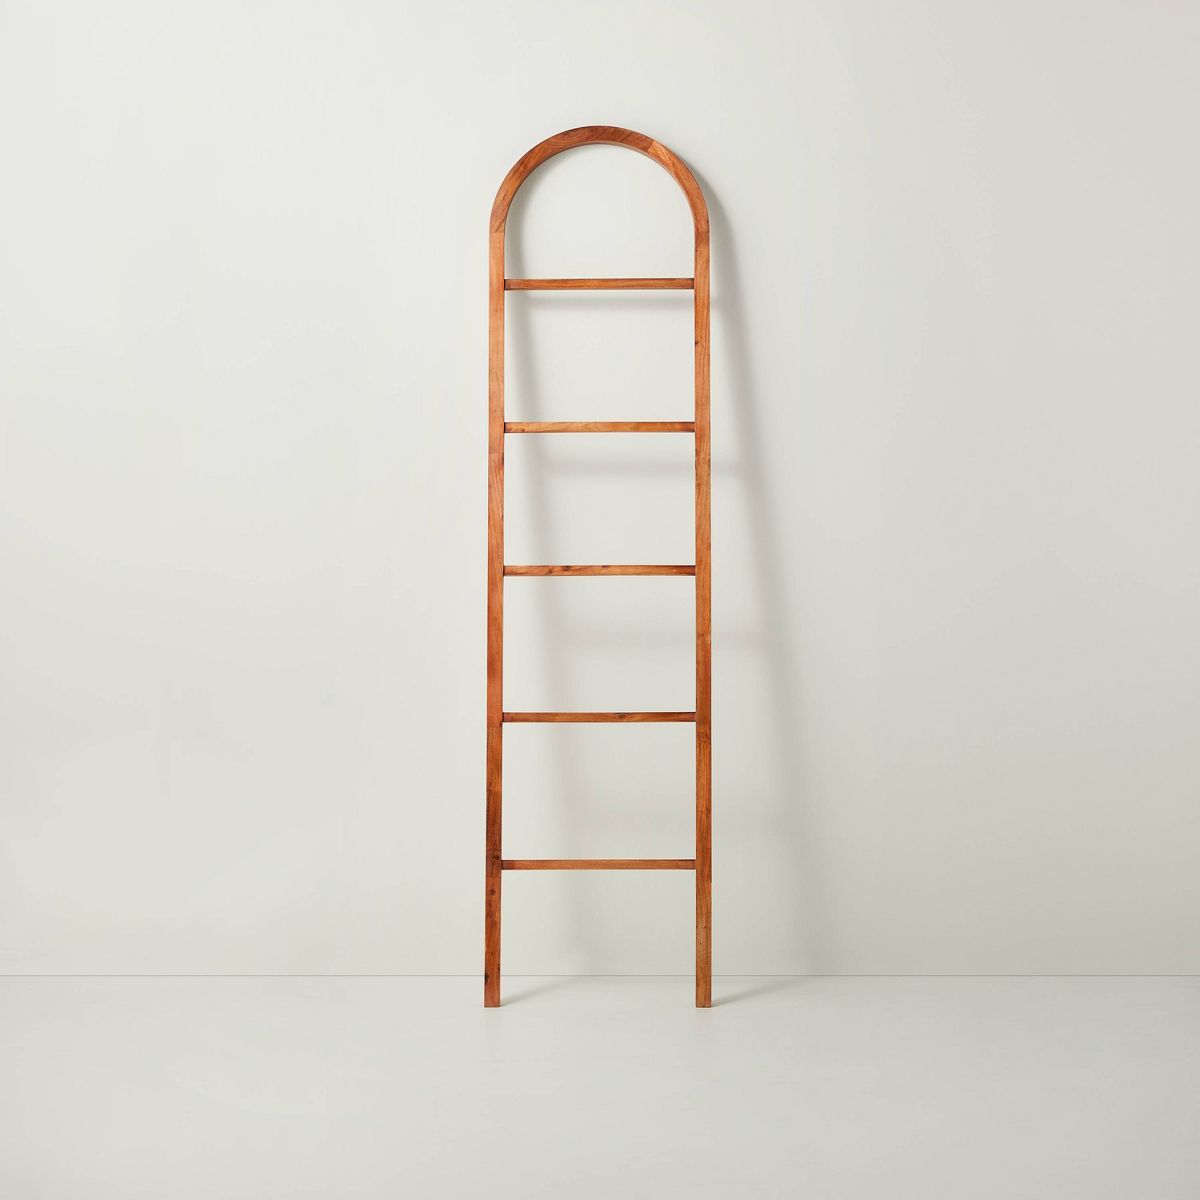 6' Arched Wood Throw Blanket Ladder Brown - Hearth & Hand™ with Magnolia | Target